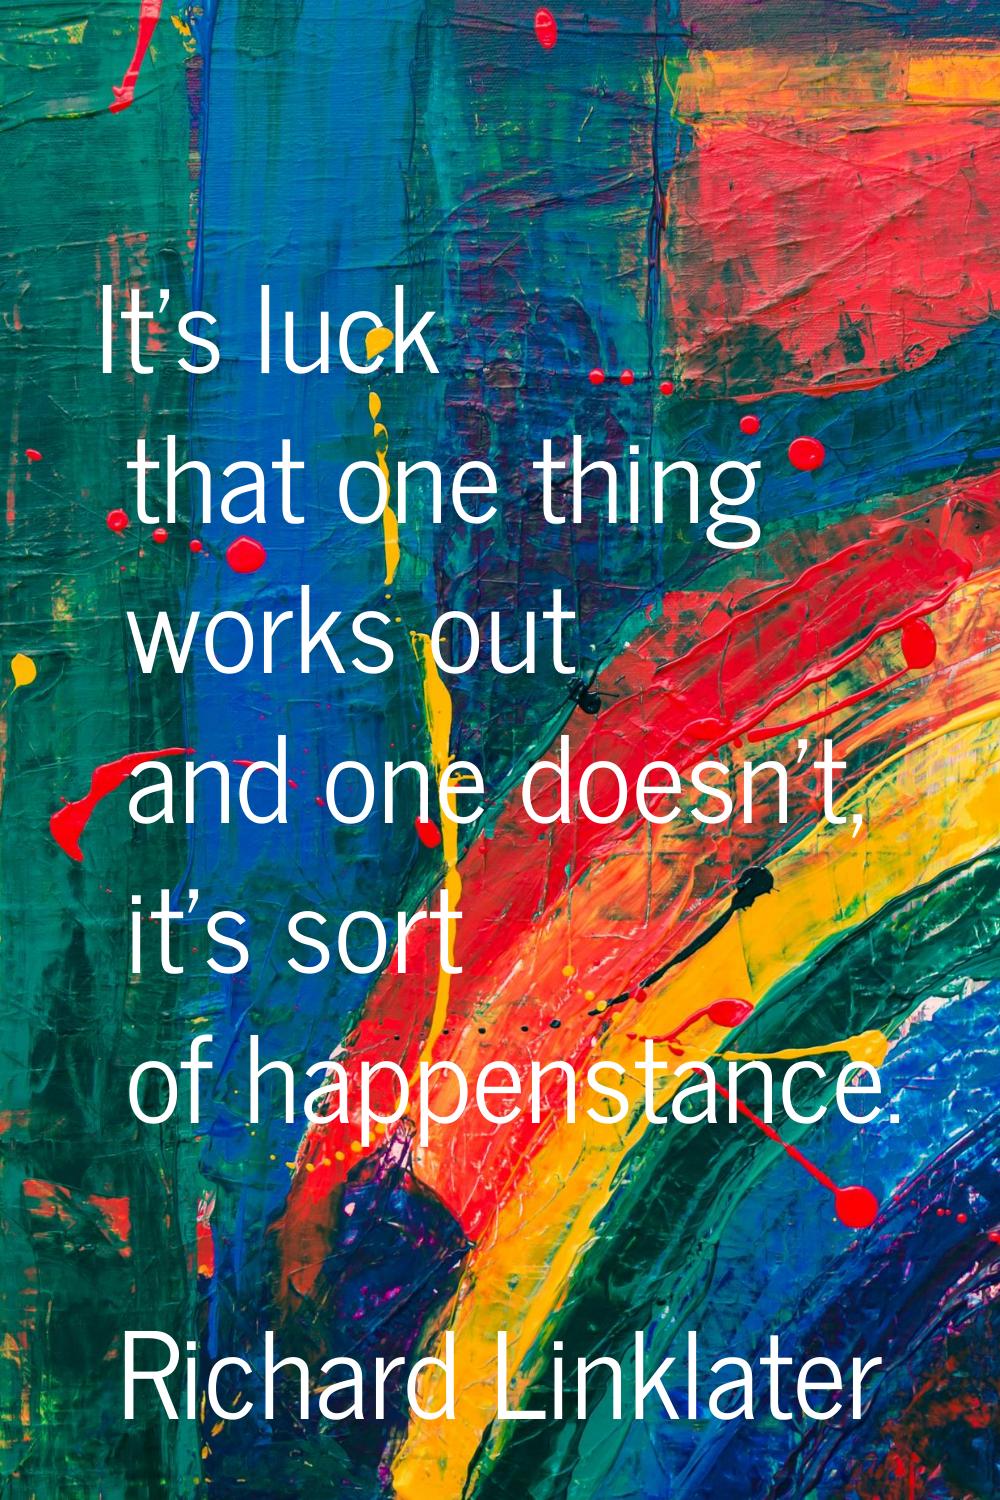 It's luck that one thing works out and one doesn't, it's sort of happenstance.